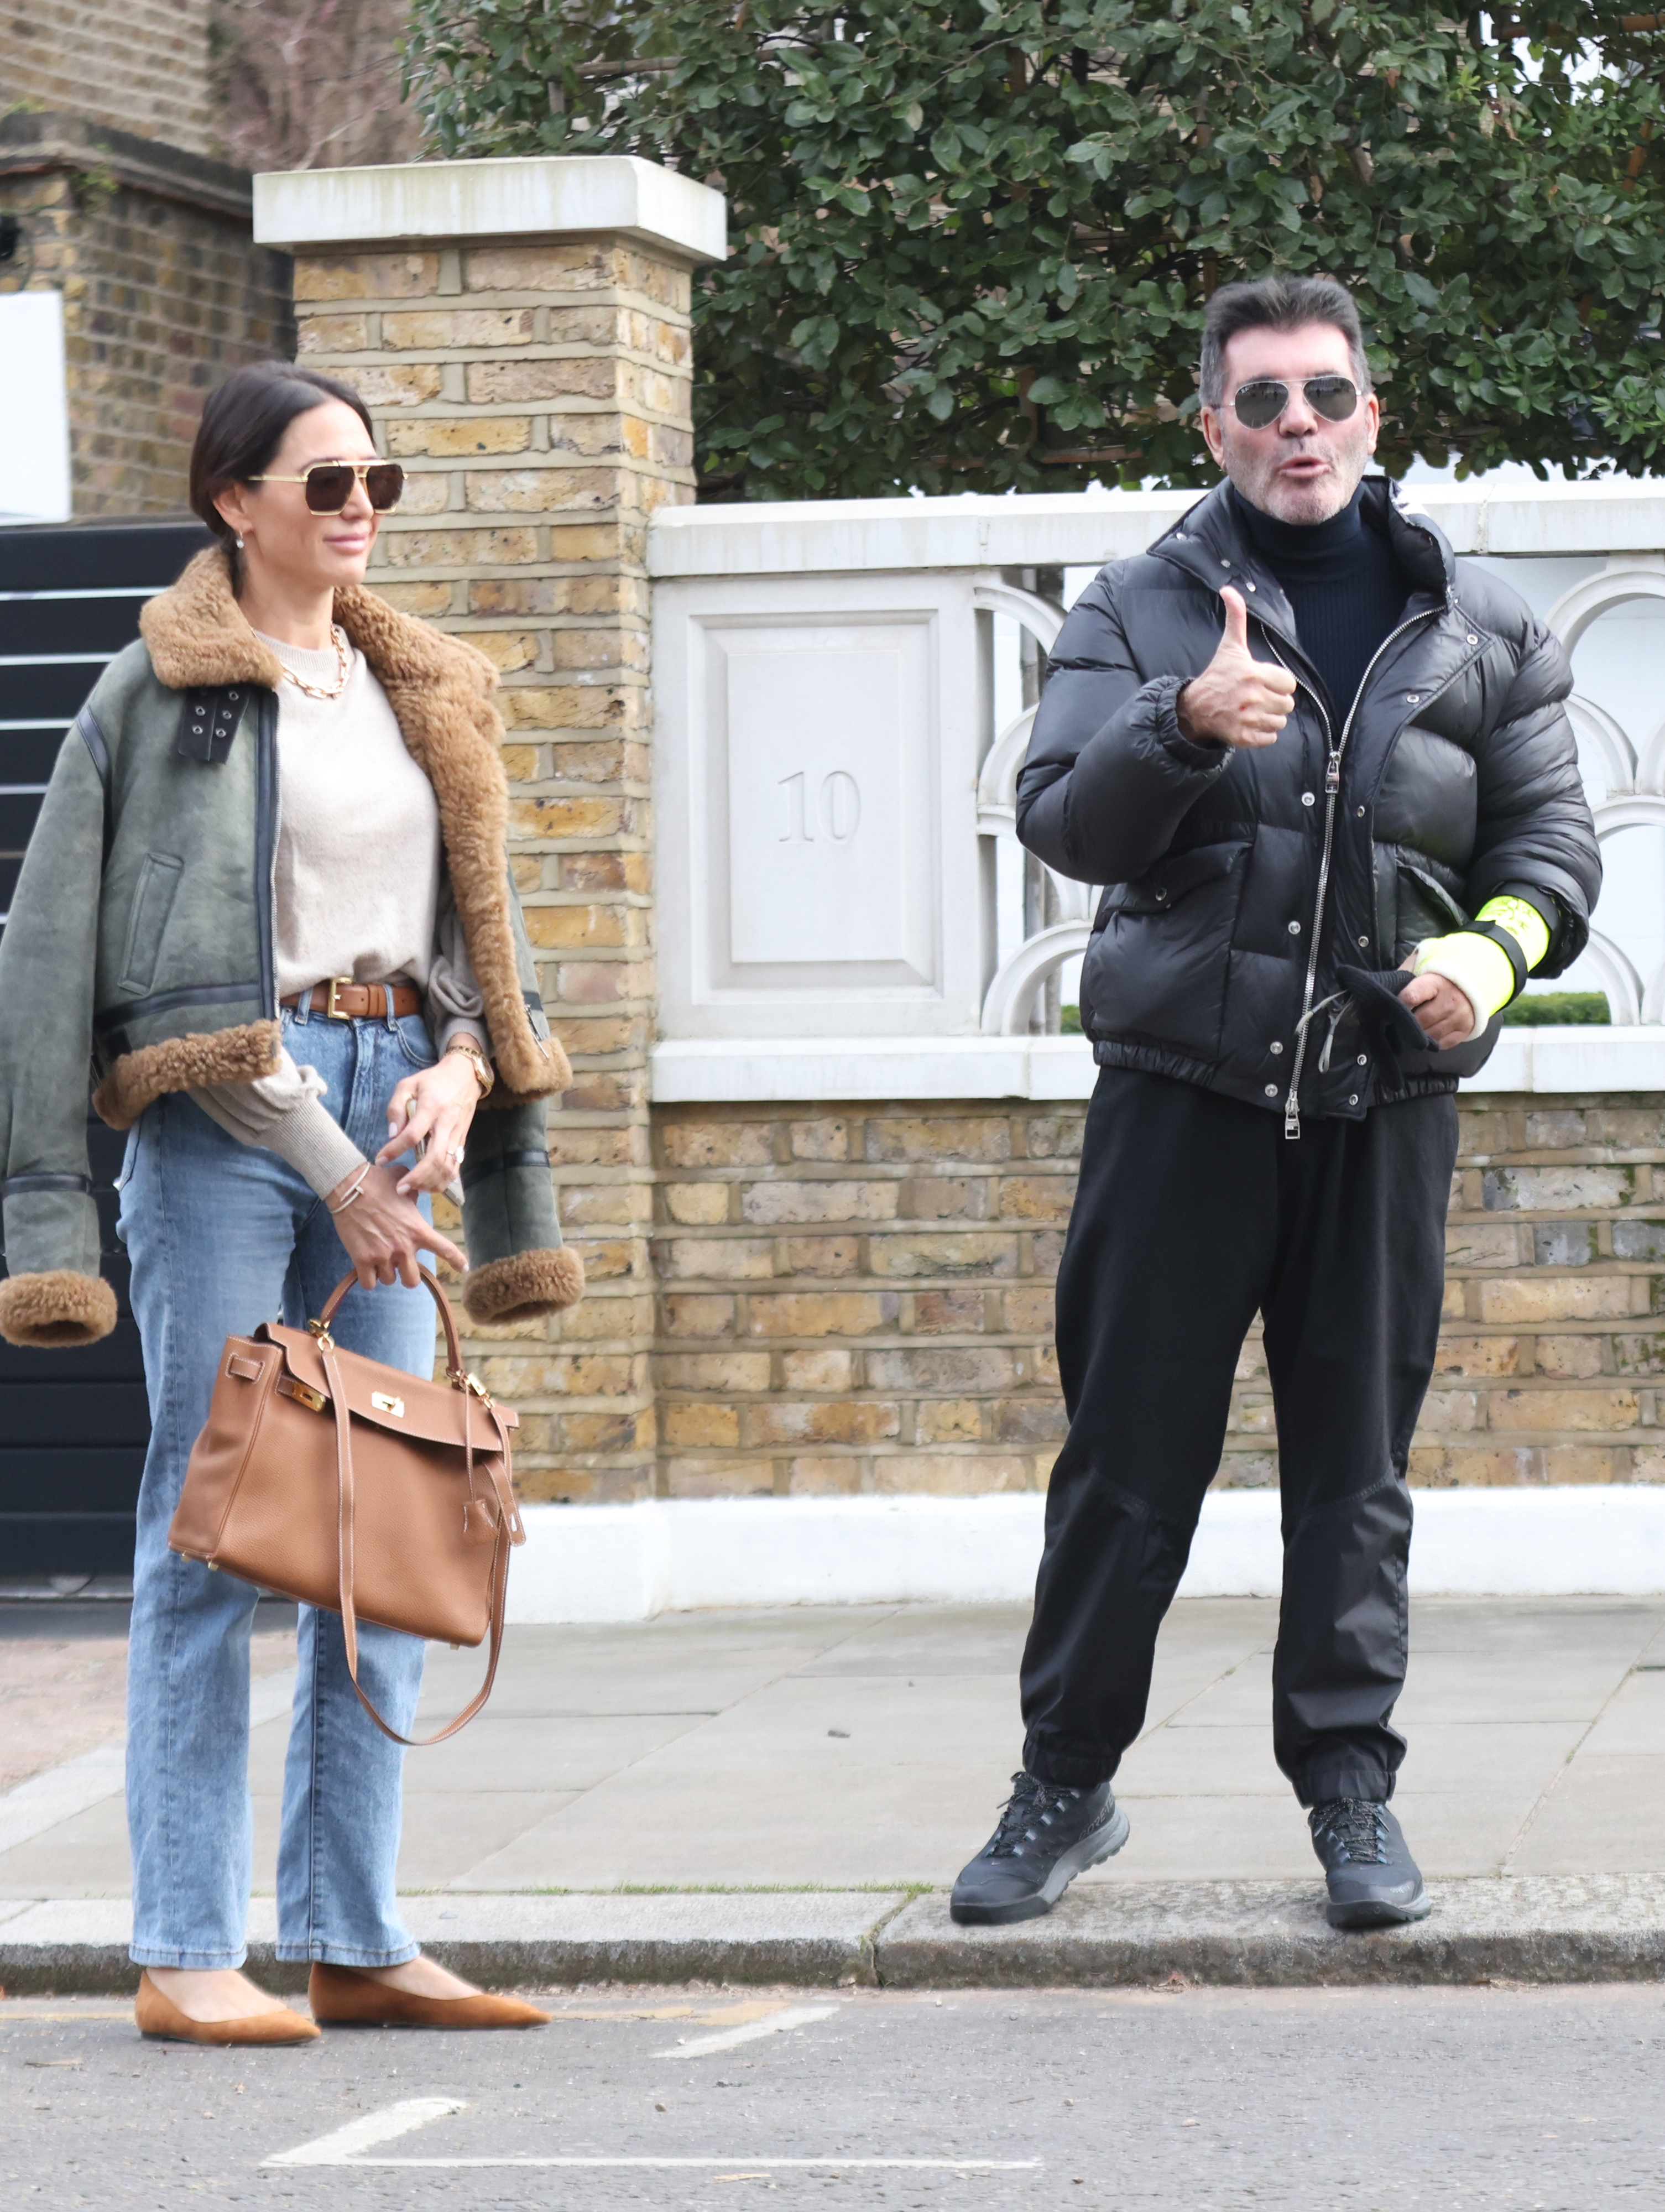 Simon Cowell and his partner, Lauren Silverman outside their home in London's Holland Park on February 2, 2022 | Source: Getty Images